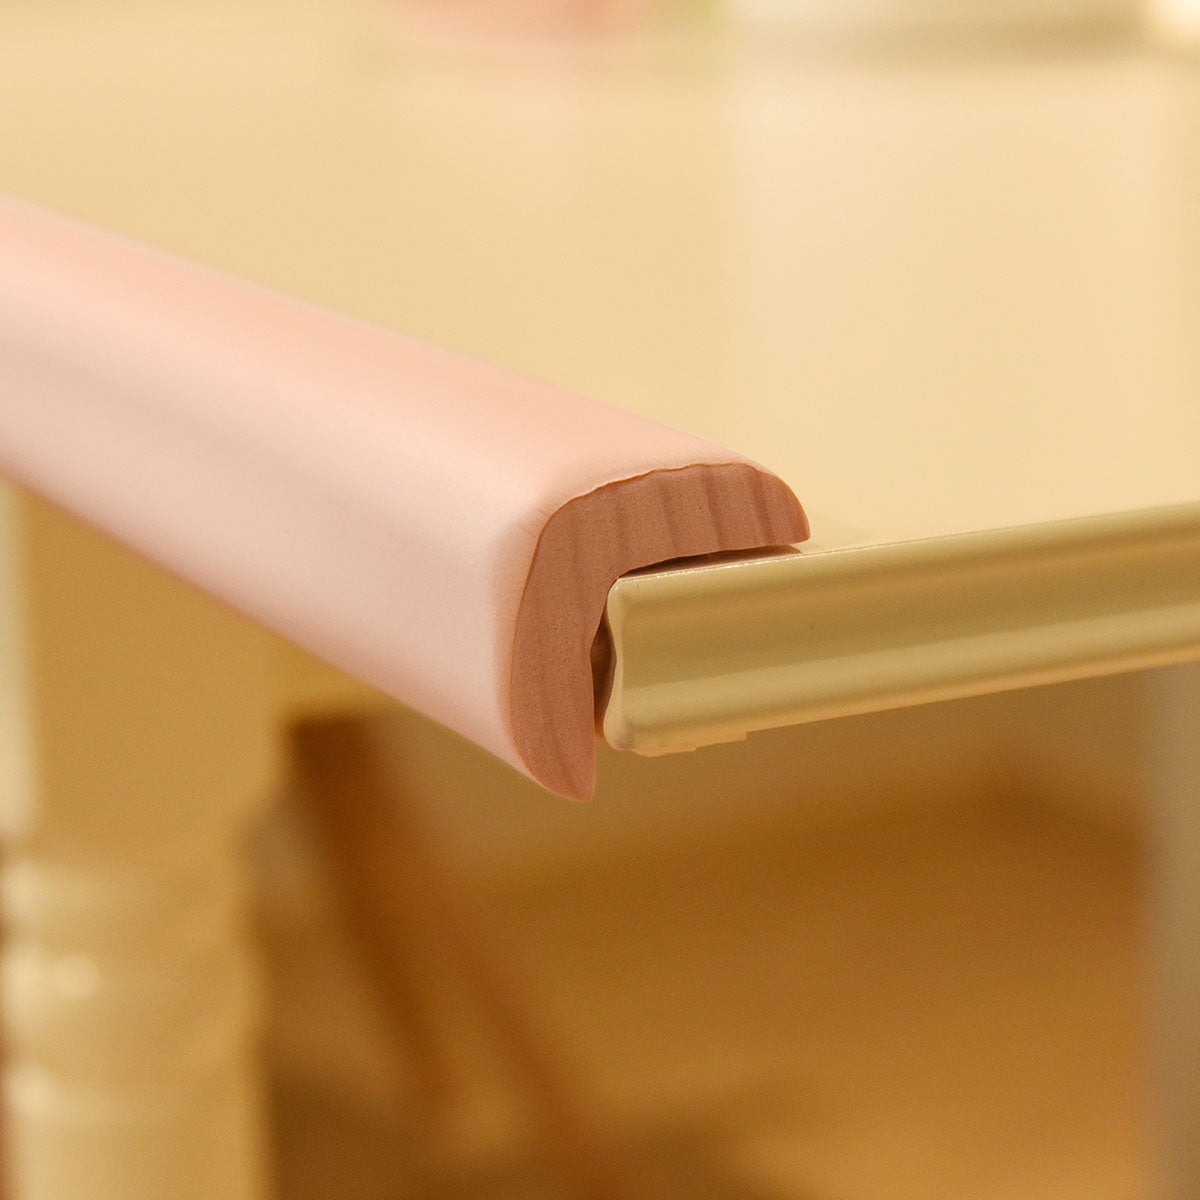 1 Roll Pink Jumbo L-Shaped Foam Edge Protector 78.7 inches (2 meters)